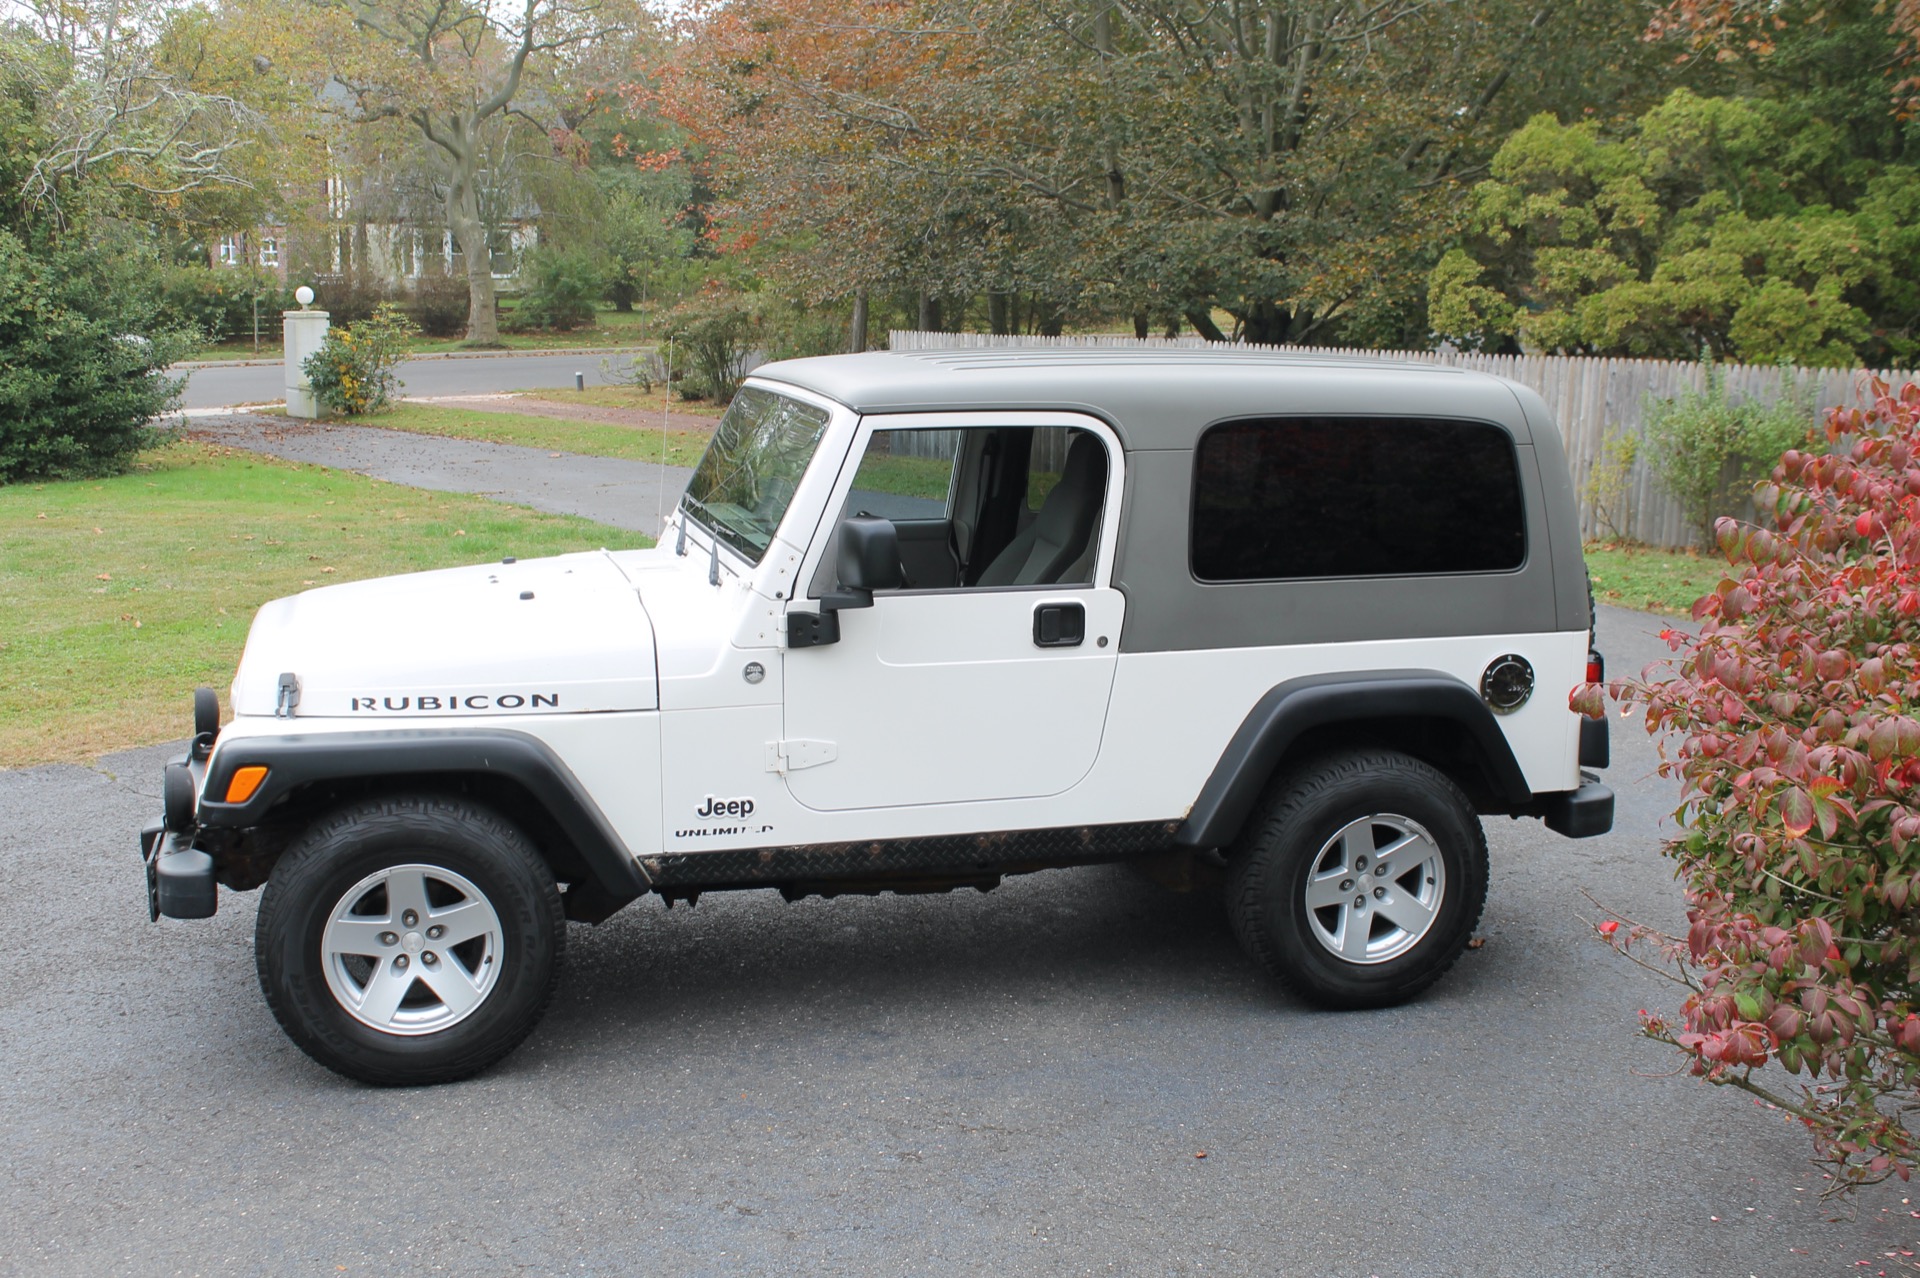 Used 2006 Jeep Wrangler LJ Rubicon Automatic Rubicon For Sale ($15,900) |  Legend Leasing Stock #844